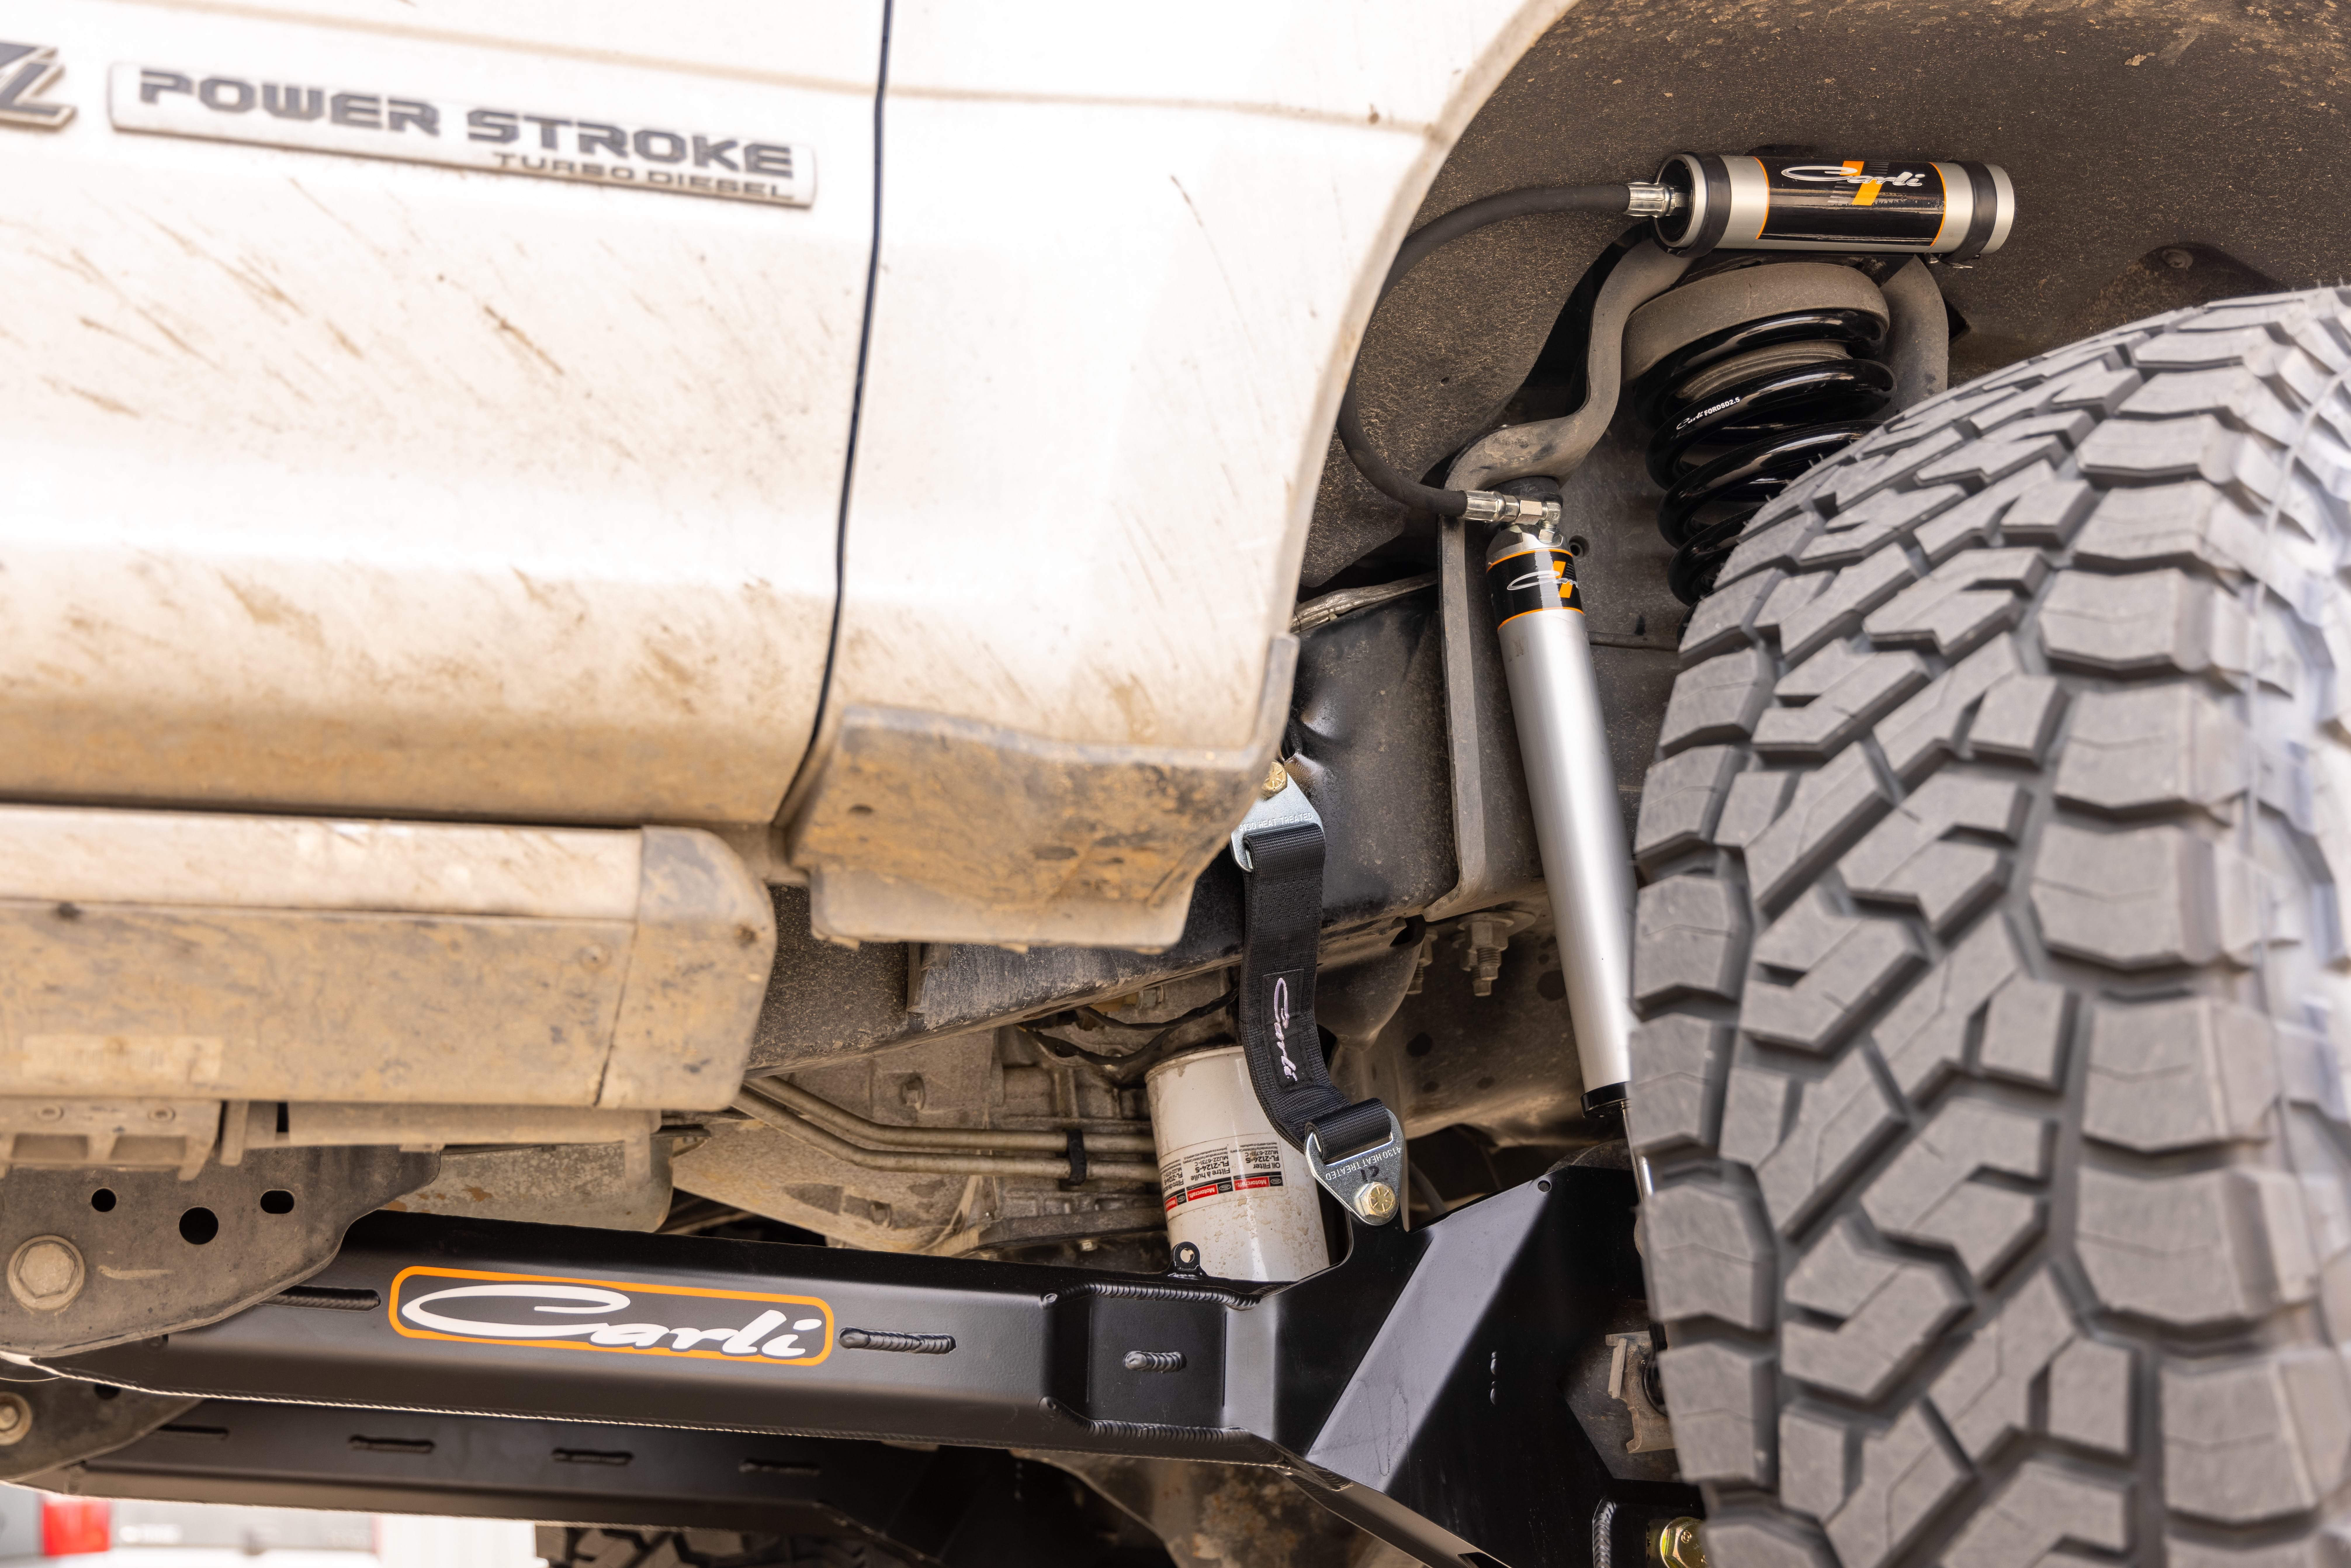 2017 Ford F-250 Super Duty Lariat in Silver with Carli 3.5" Backcountry Suspension Kit, Carli High Mount Steering Stabilizer, Carli Low Mount Steering Stabilizer, Carli Torsion Sway Bar, Carli Radius Arms, Carli Full Rear Spring Replacement, 18x9" Method 305NV HD Black Wheels, 37x12.50R18 Toyo Open Country R/T Trail Tires